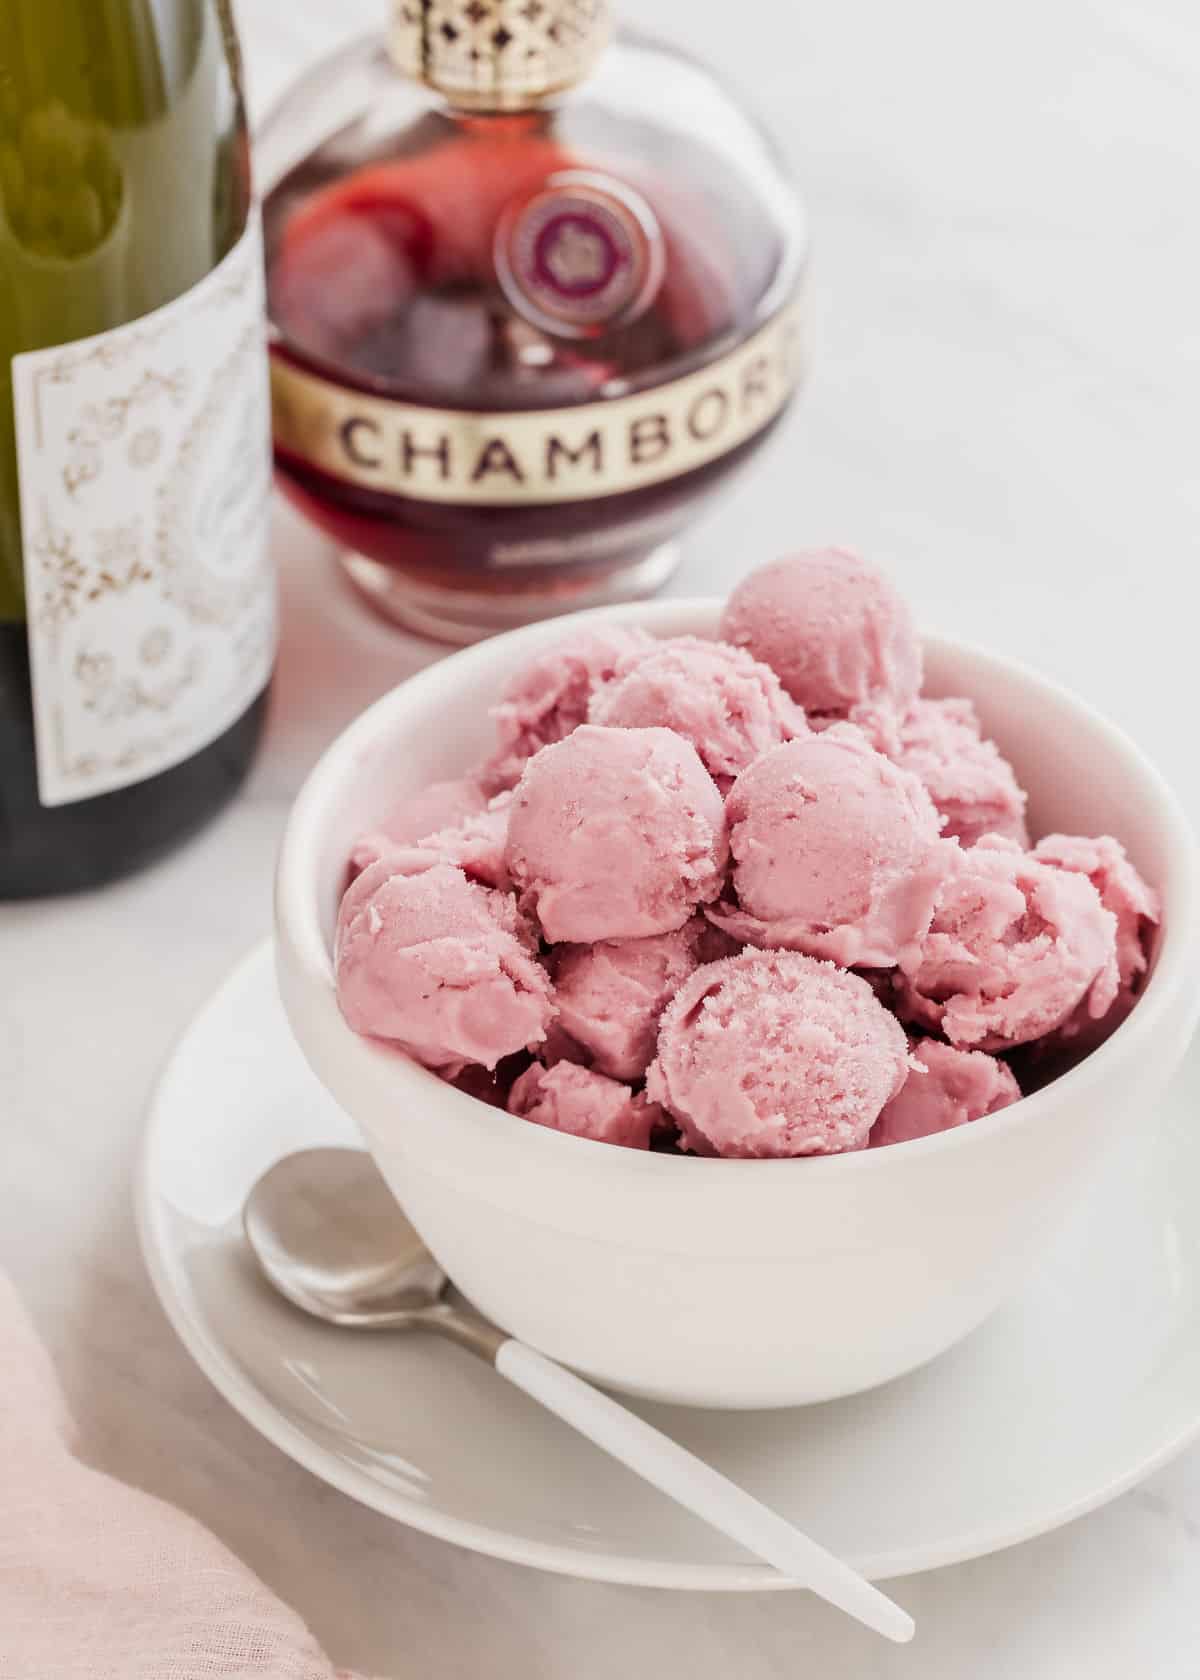 mini pink sherbet scoops in small white bowl, with champagne and Chambord behind.